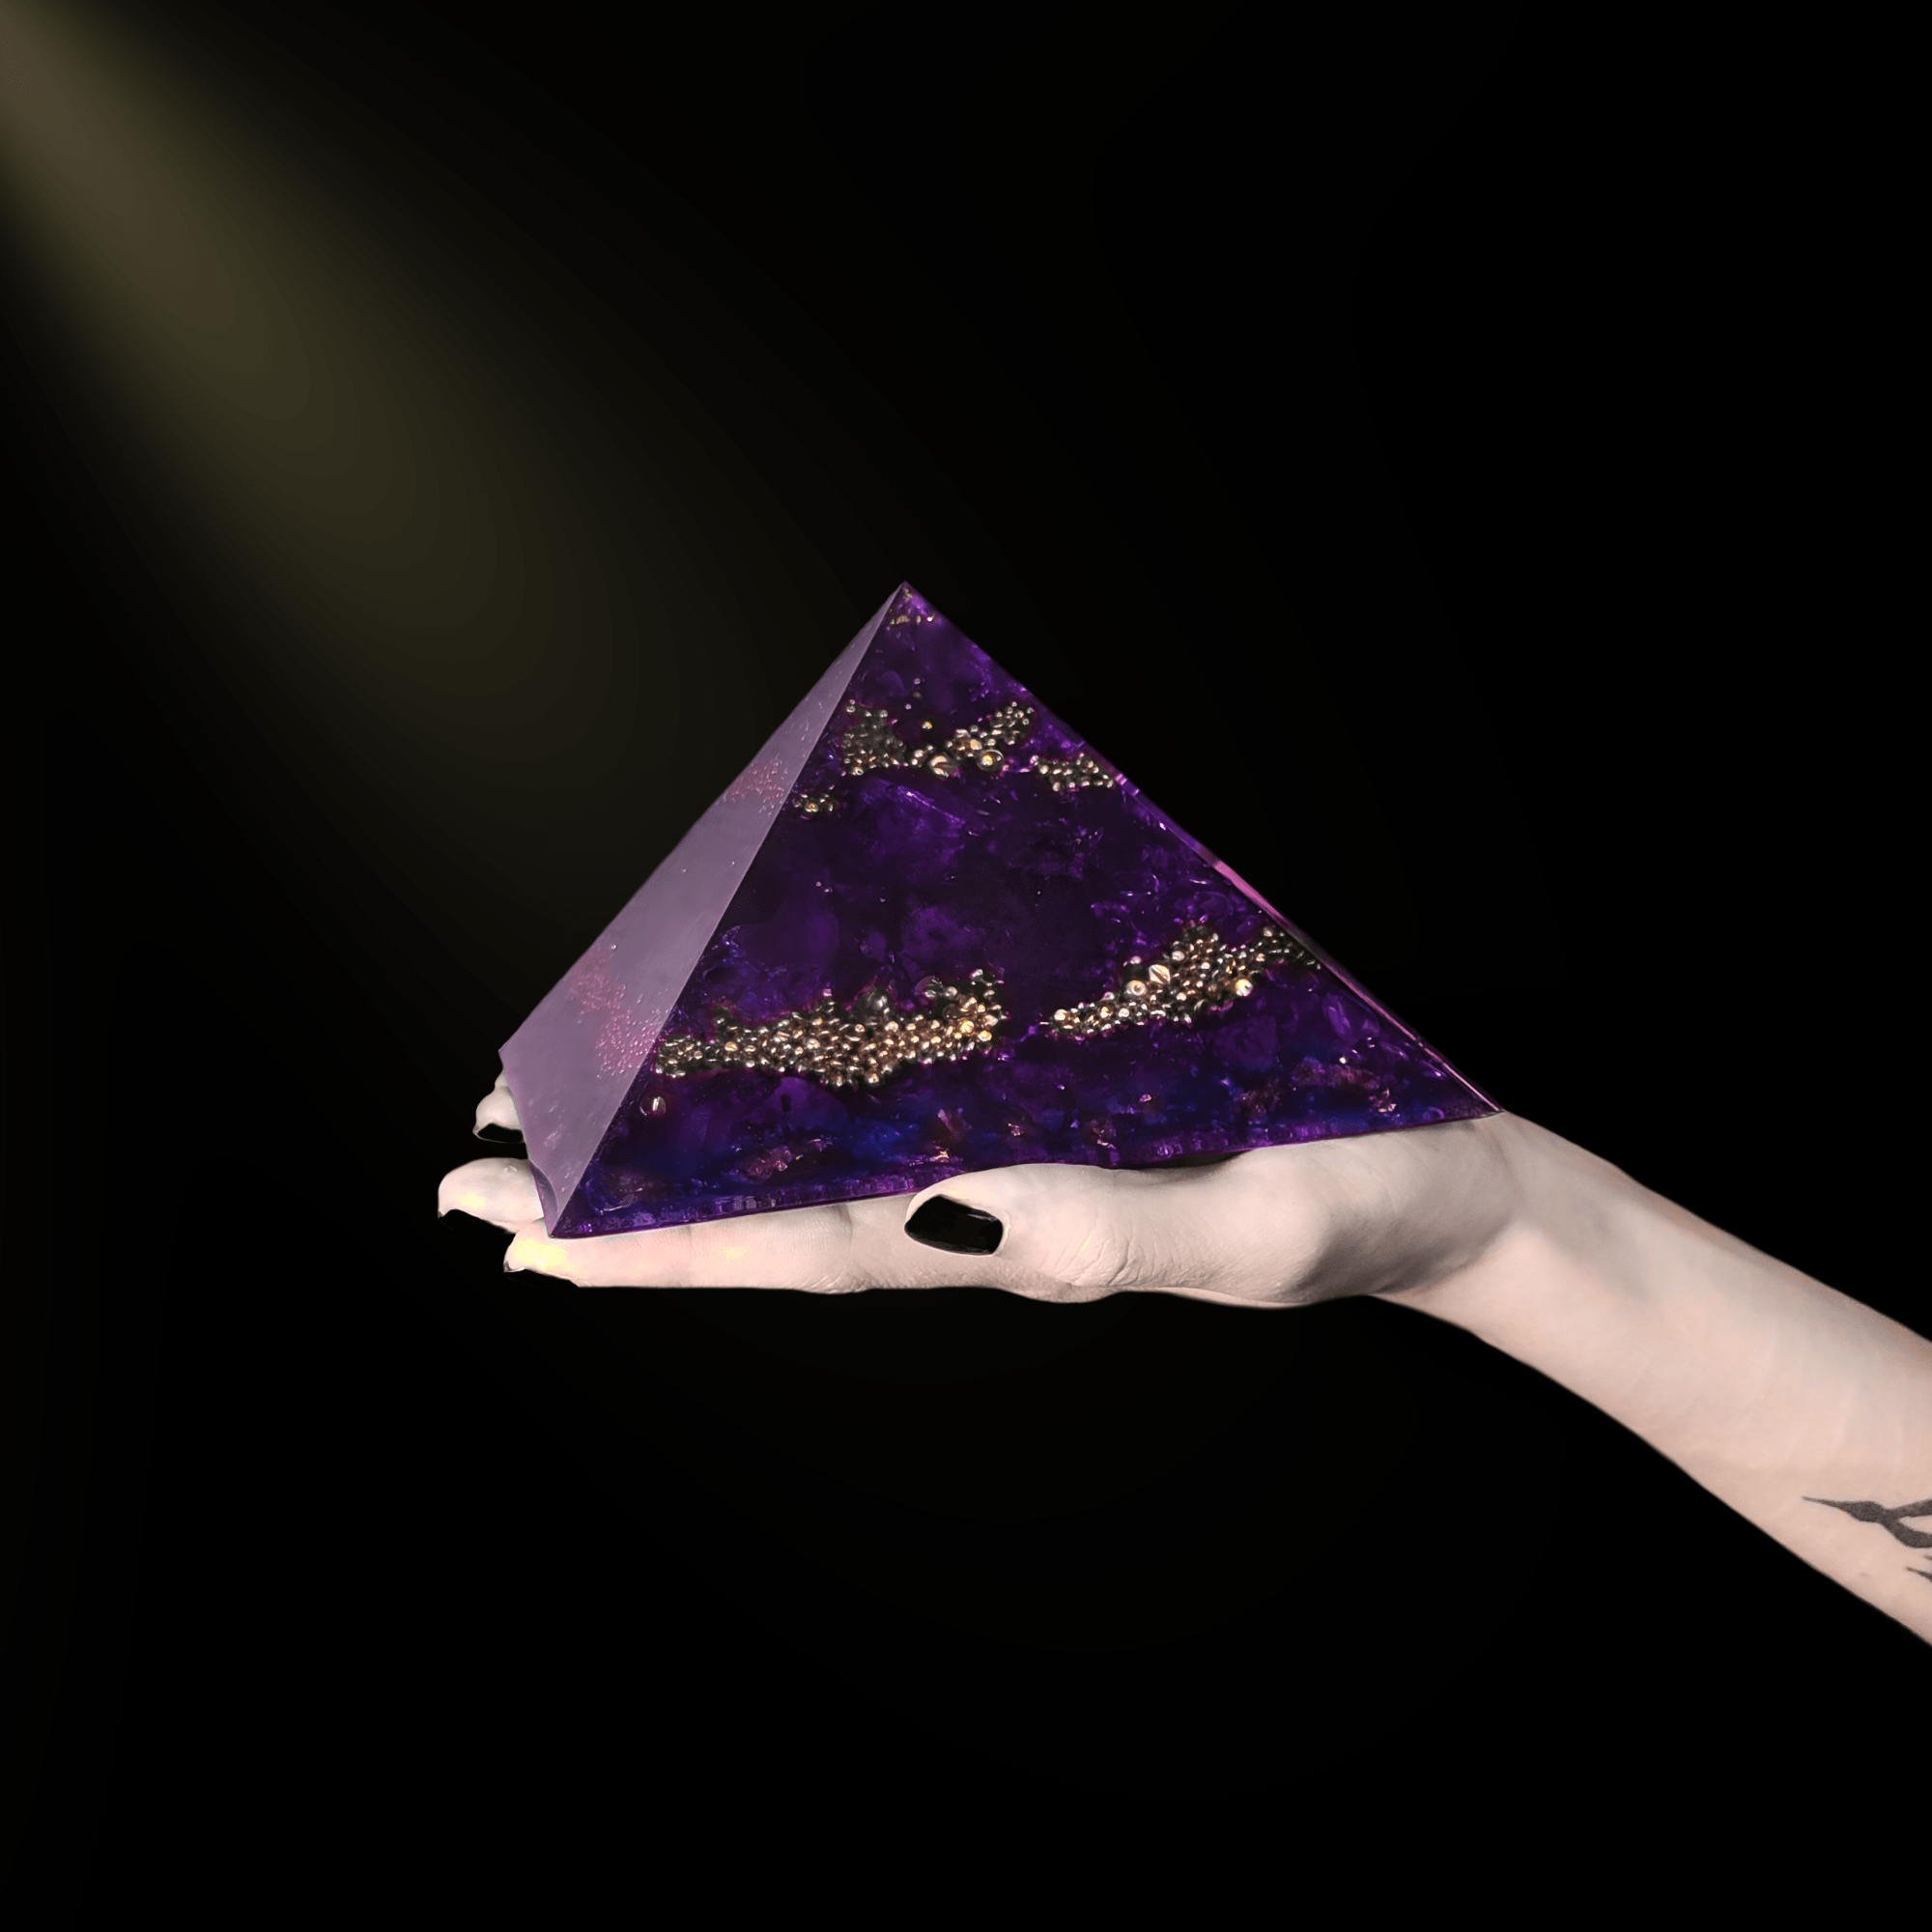 16cm XXL Orgonit Pyramide in Lila aus Amethyst, Charoit, Anhydrit & Gold.